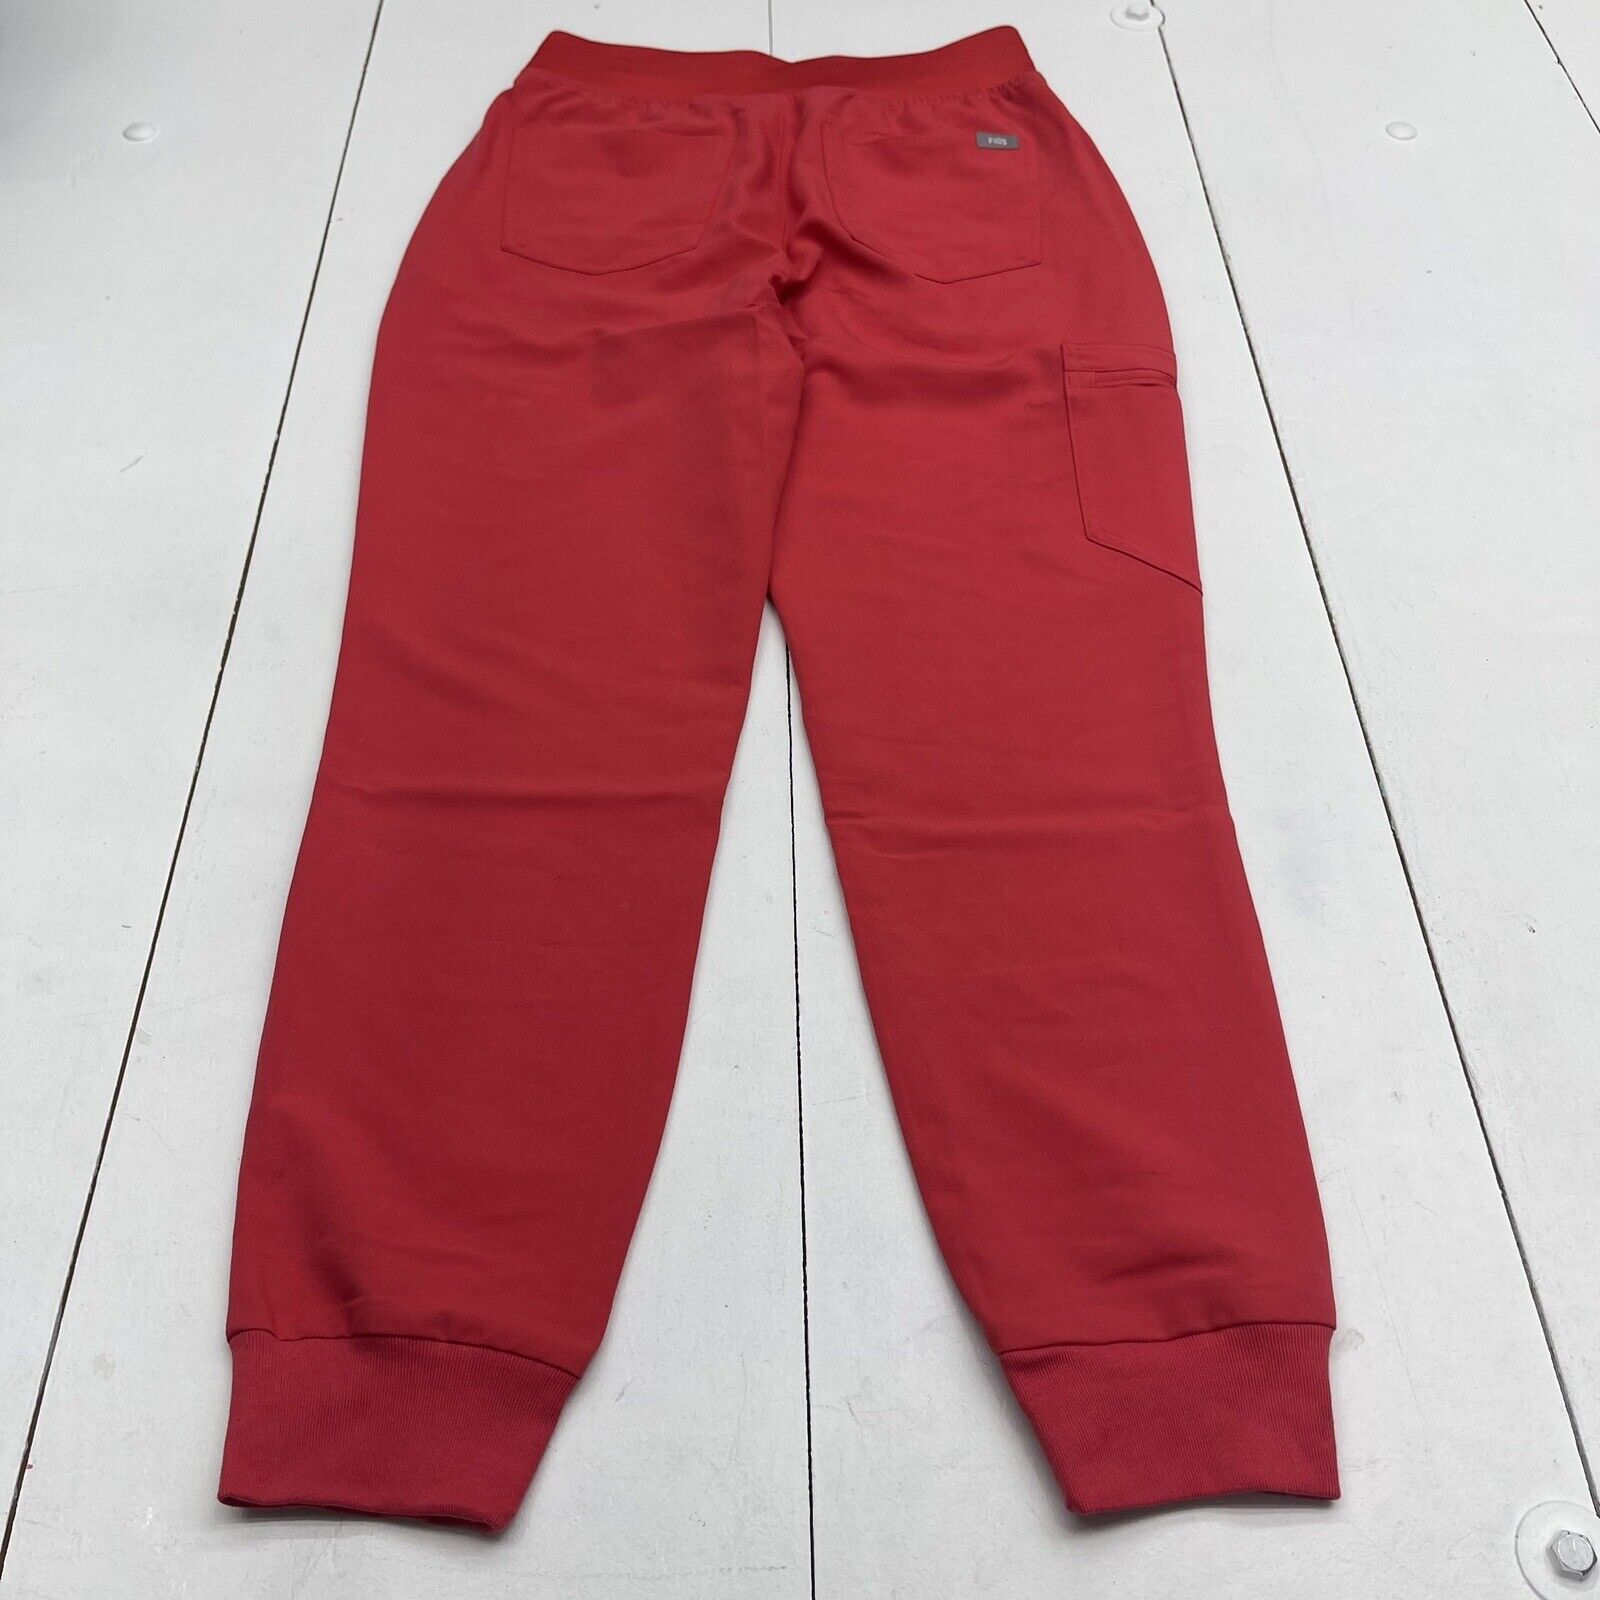 Figs High Waisted Zamora Jogger Scrubs Red Women's Small New Defect $4 -  beyond exchange